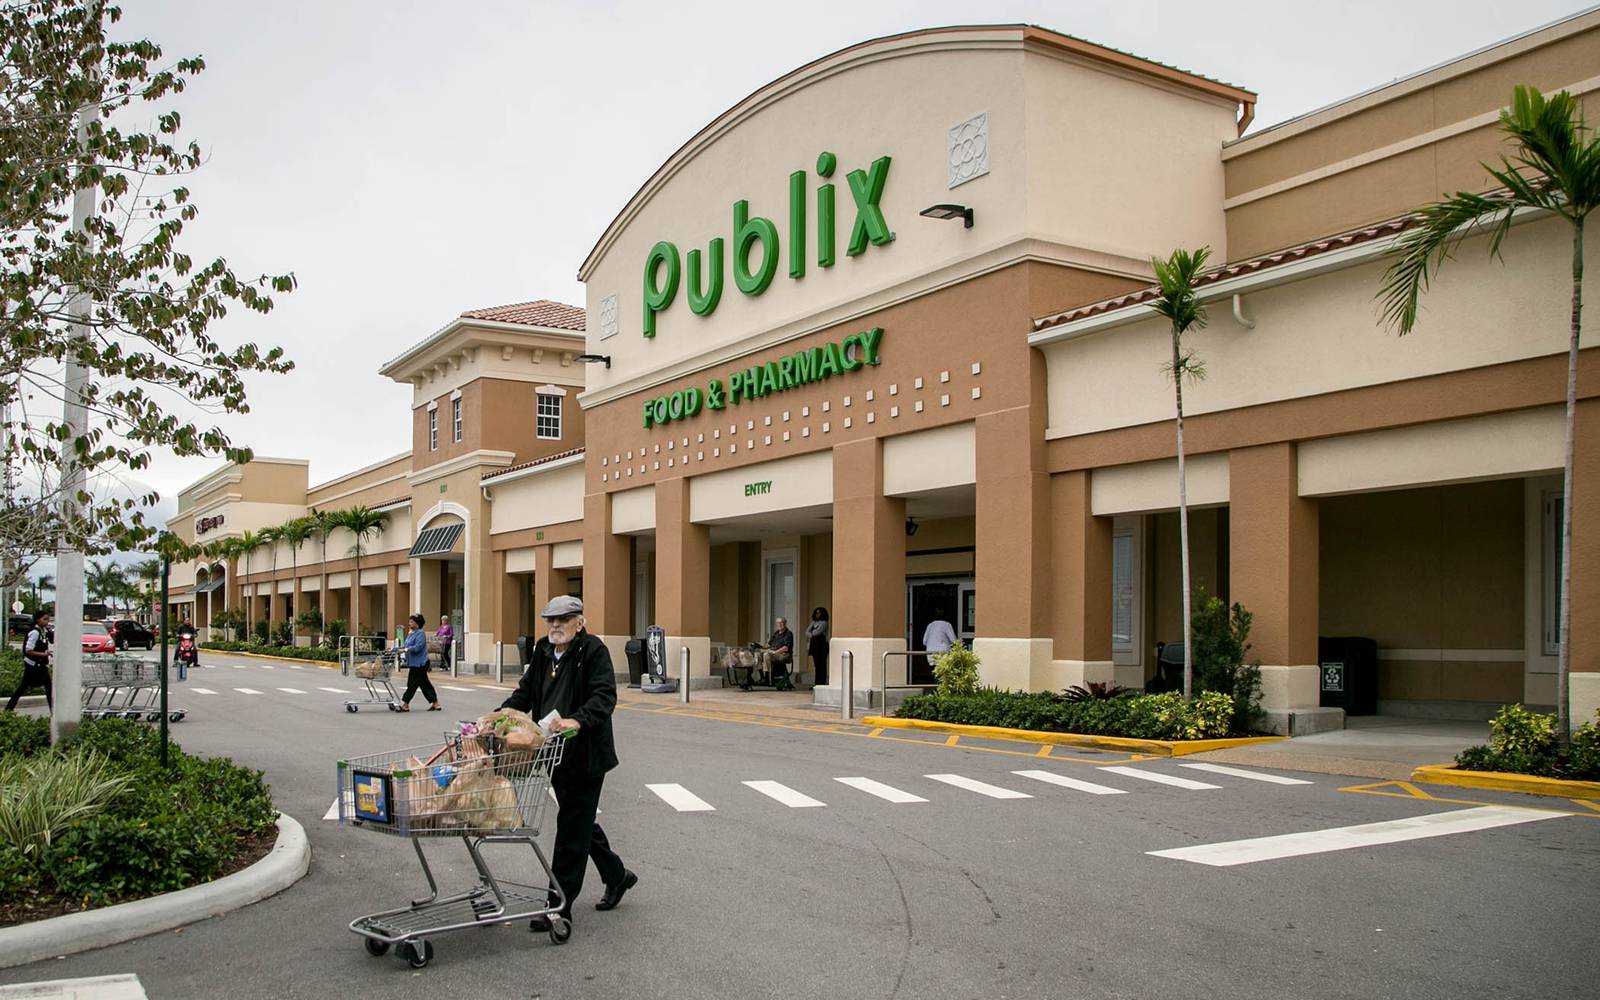 COVID19 vaccines coming to Publix pharmacies in WSBTV